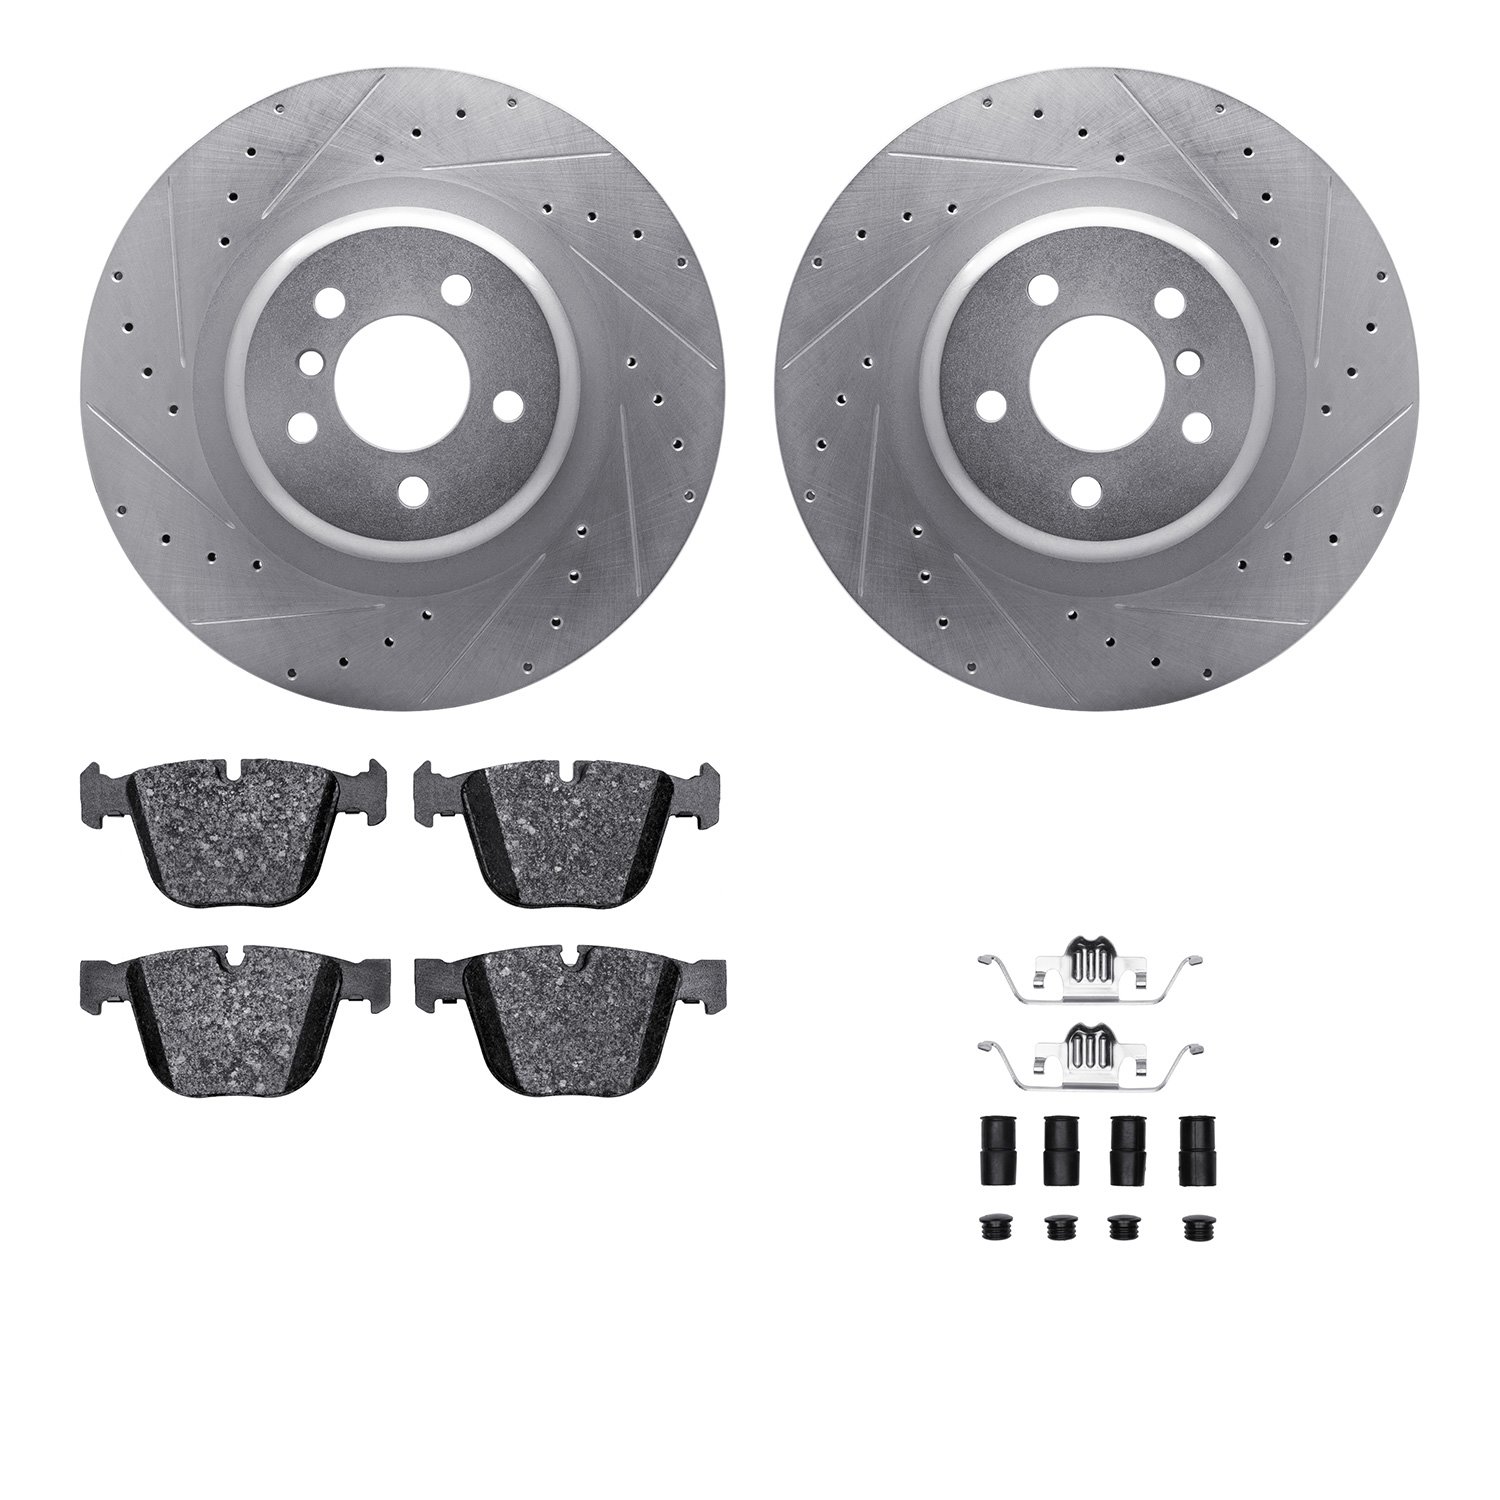 7512-31145 Drilled/Slotted Brake Rotors w/5000 Advanced Brake Pads Kit & Hardware [Silver], 2010-2014 BMW, Position: Rear